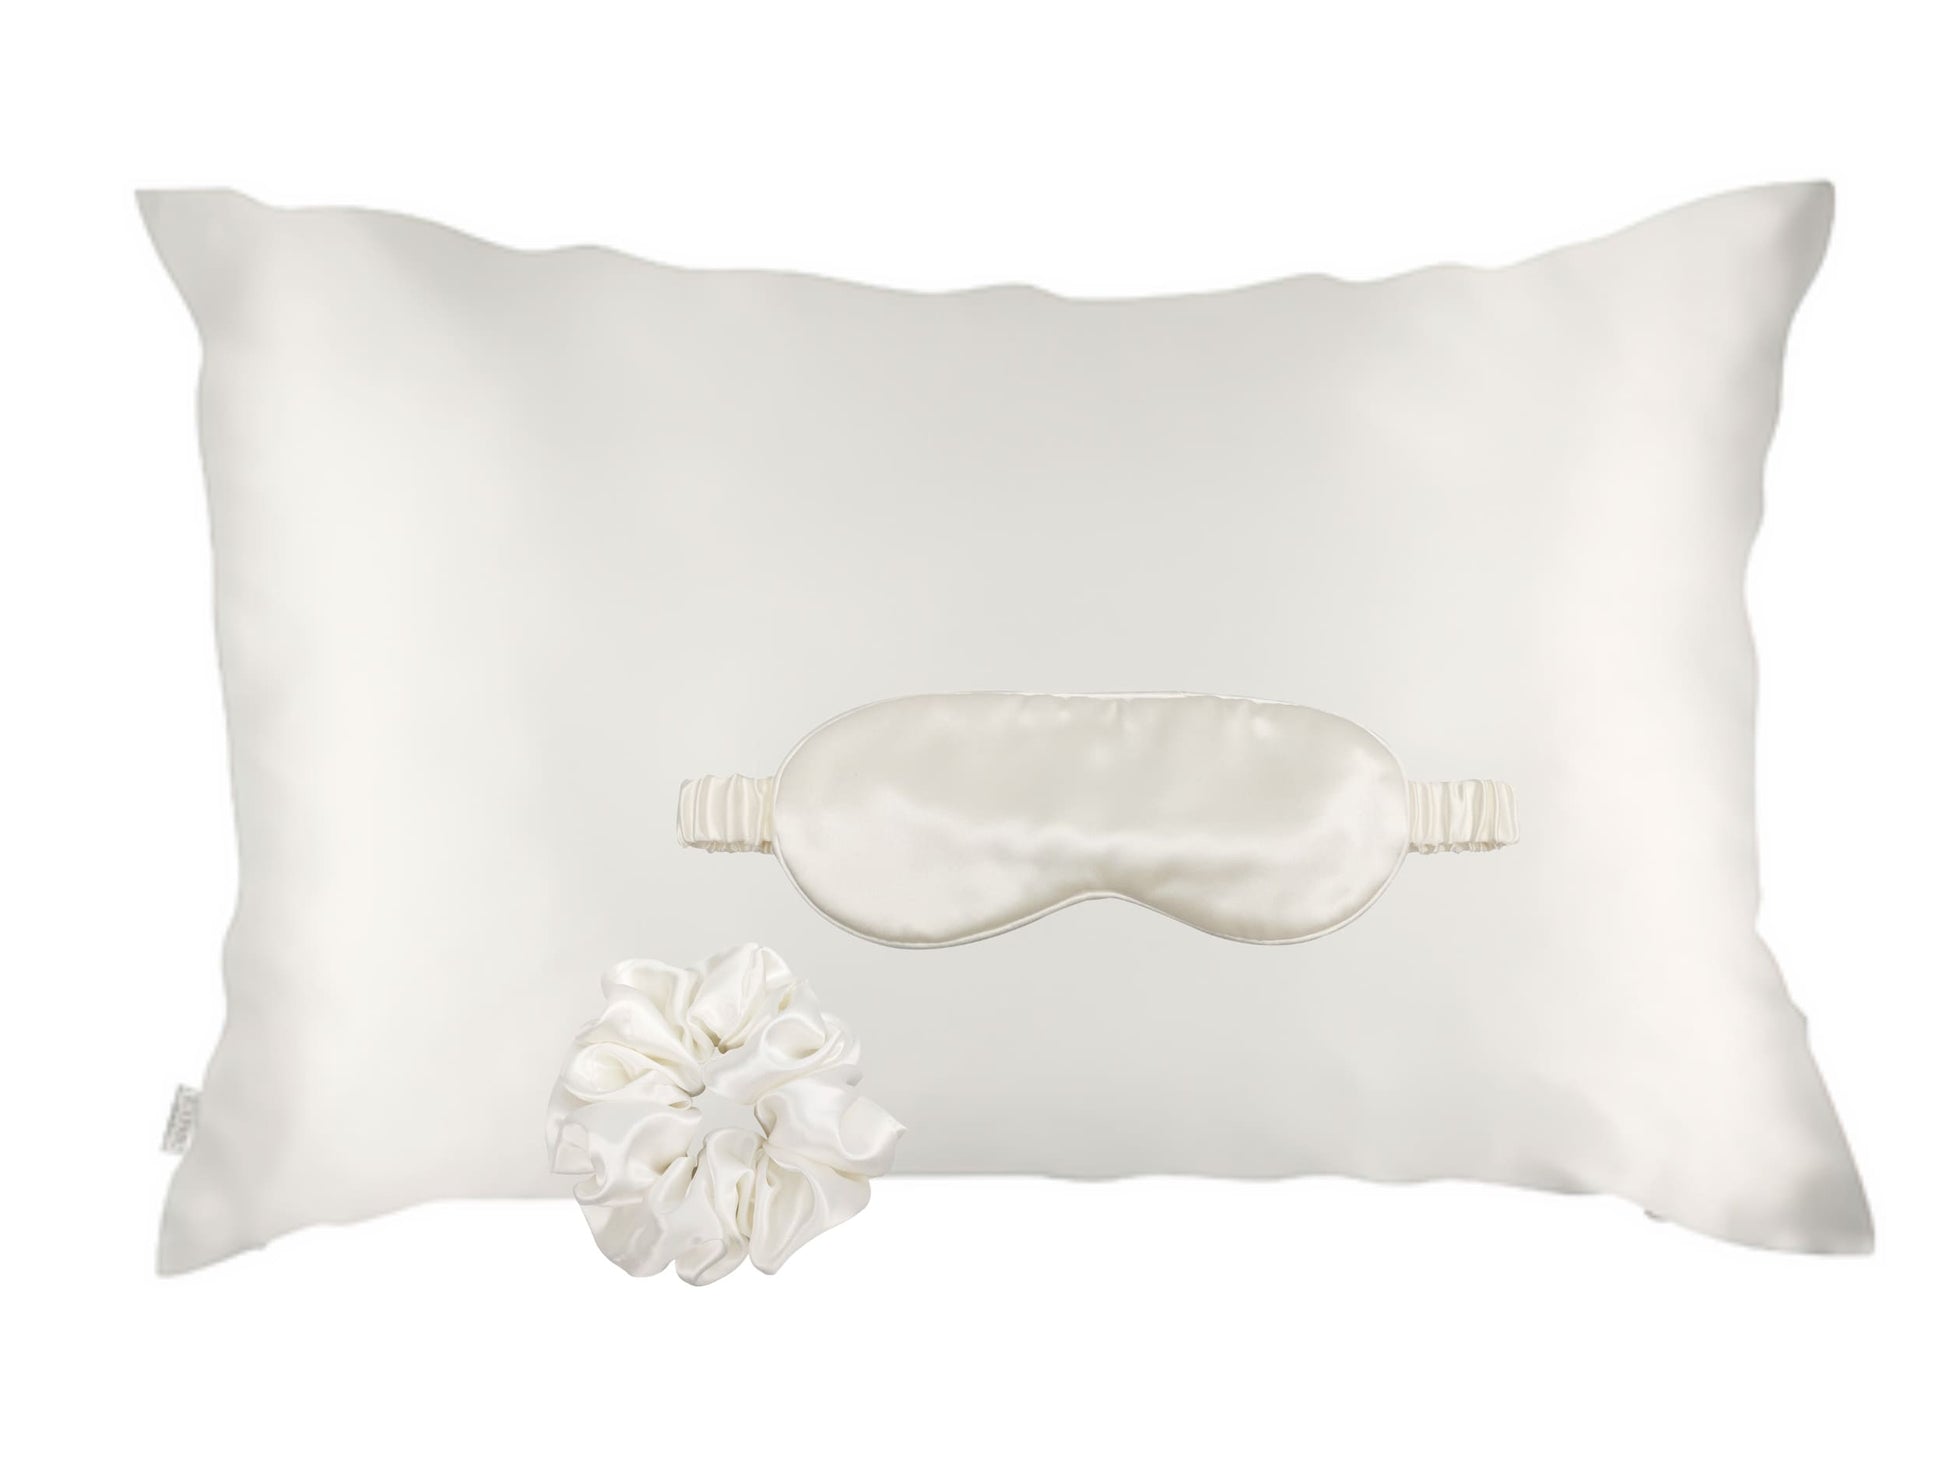 Experience the ultimate beauty sleep with our Hyaluronic Acid-infused silk set. Our luxurious silk pillowcase, eye mask, and scrunchie are all infused with skin-loving Hyaluronic Acid to help hydrate, plump, and soothe your skin and hair as you sleep. Wake up feeling refreshed and rejuvenated with the power of Hyaluronic Acid and the silky smoothness of our high-quality silk fiber.